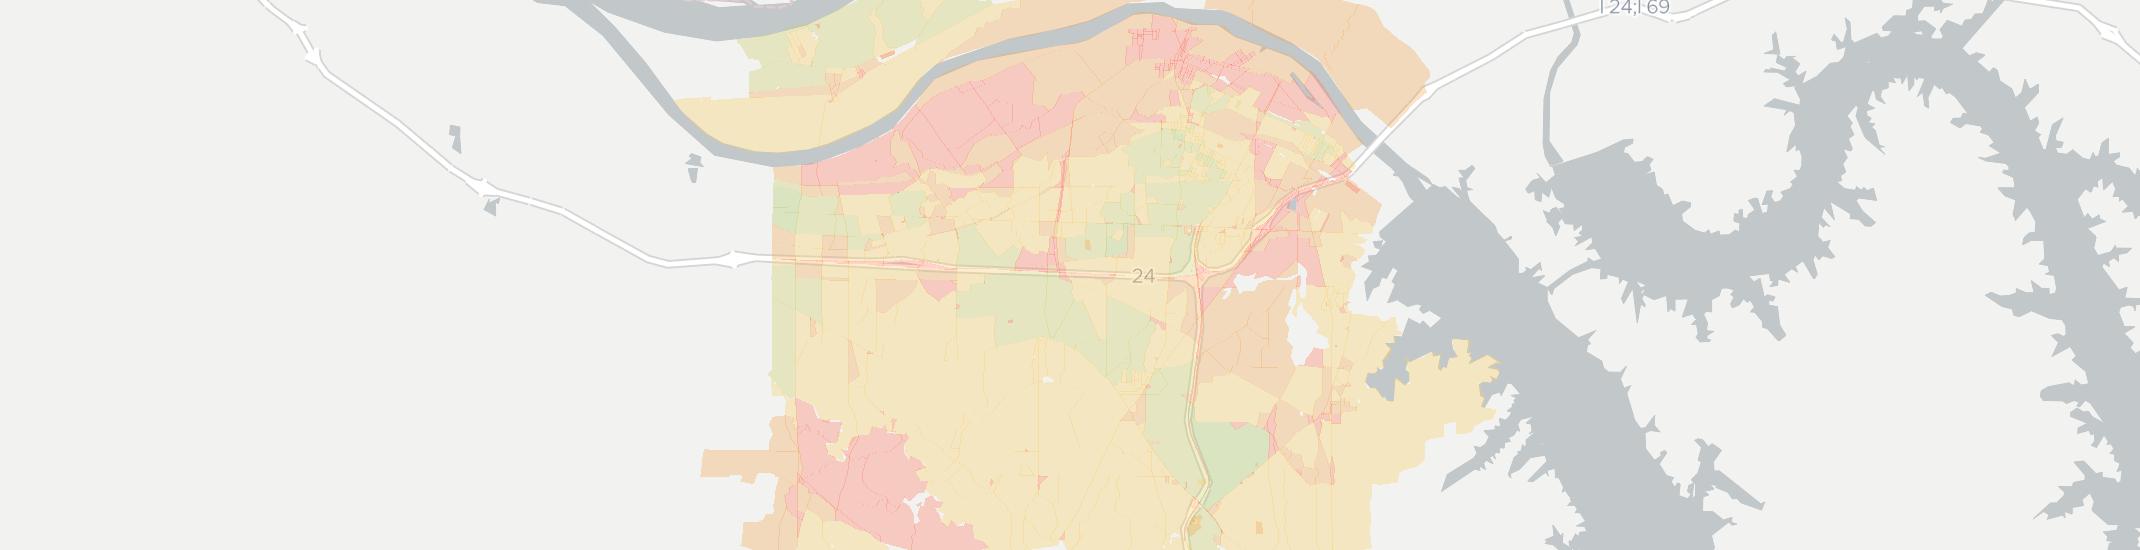 Calvert City Internet Competition Map. Click for interactive map.